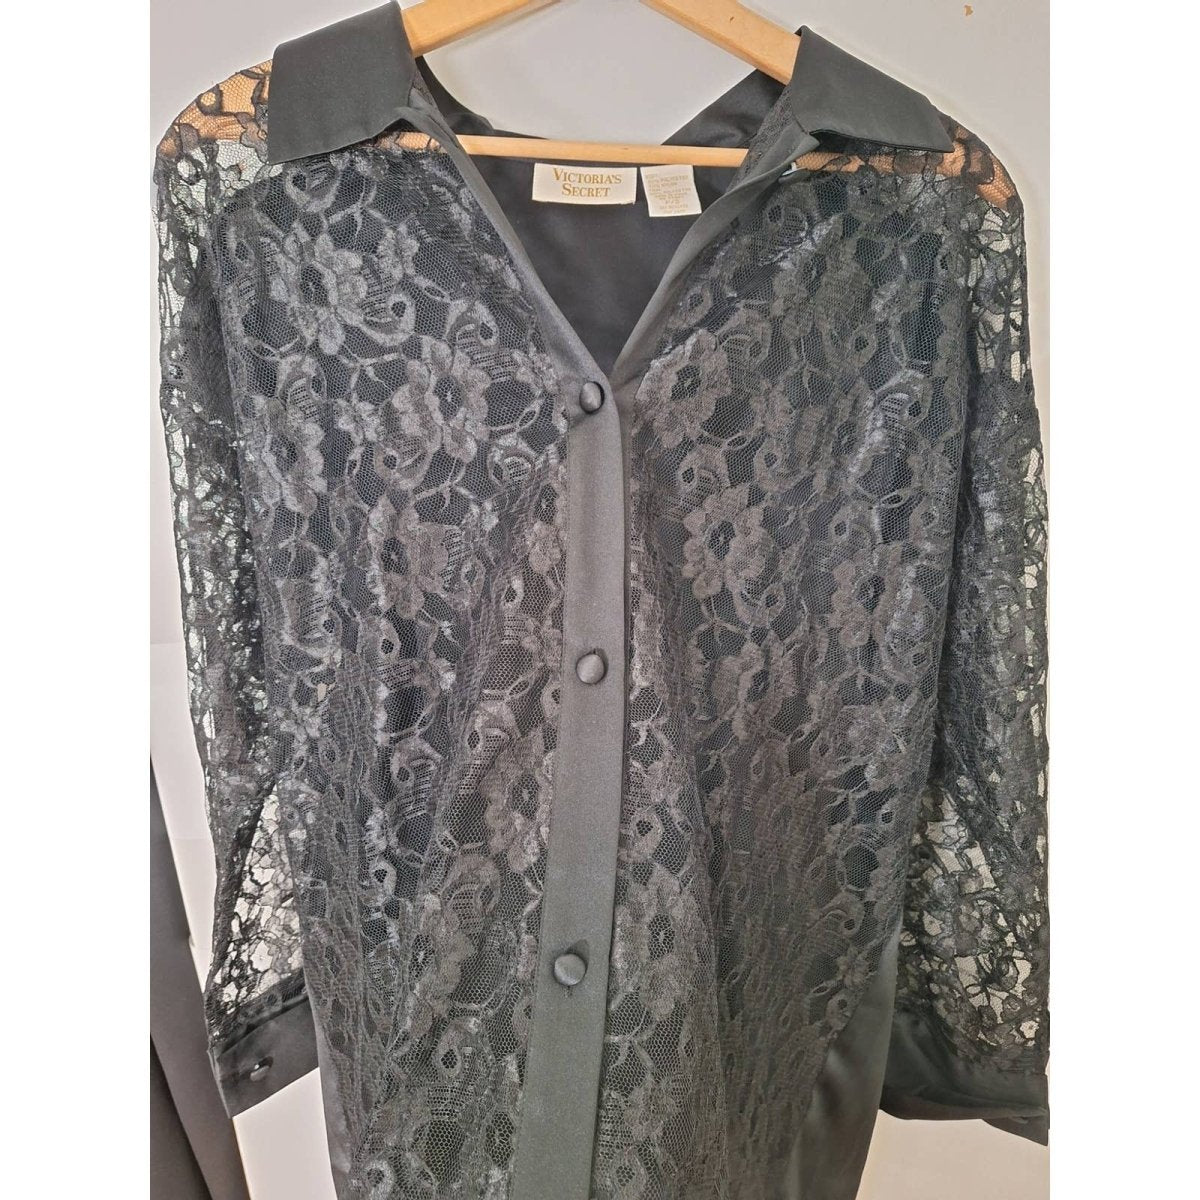 80s/90s Black Sheer Lace Oversized Button Up Lingerie Shirt Size Small Chest up to 50" - themallvintage The Mall Vintage